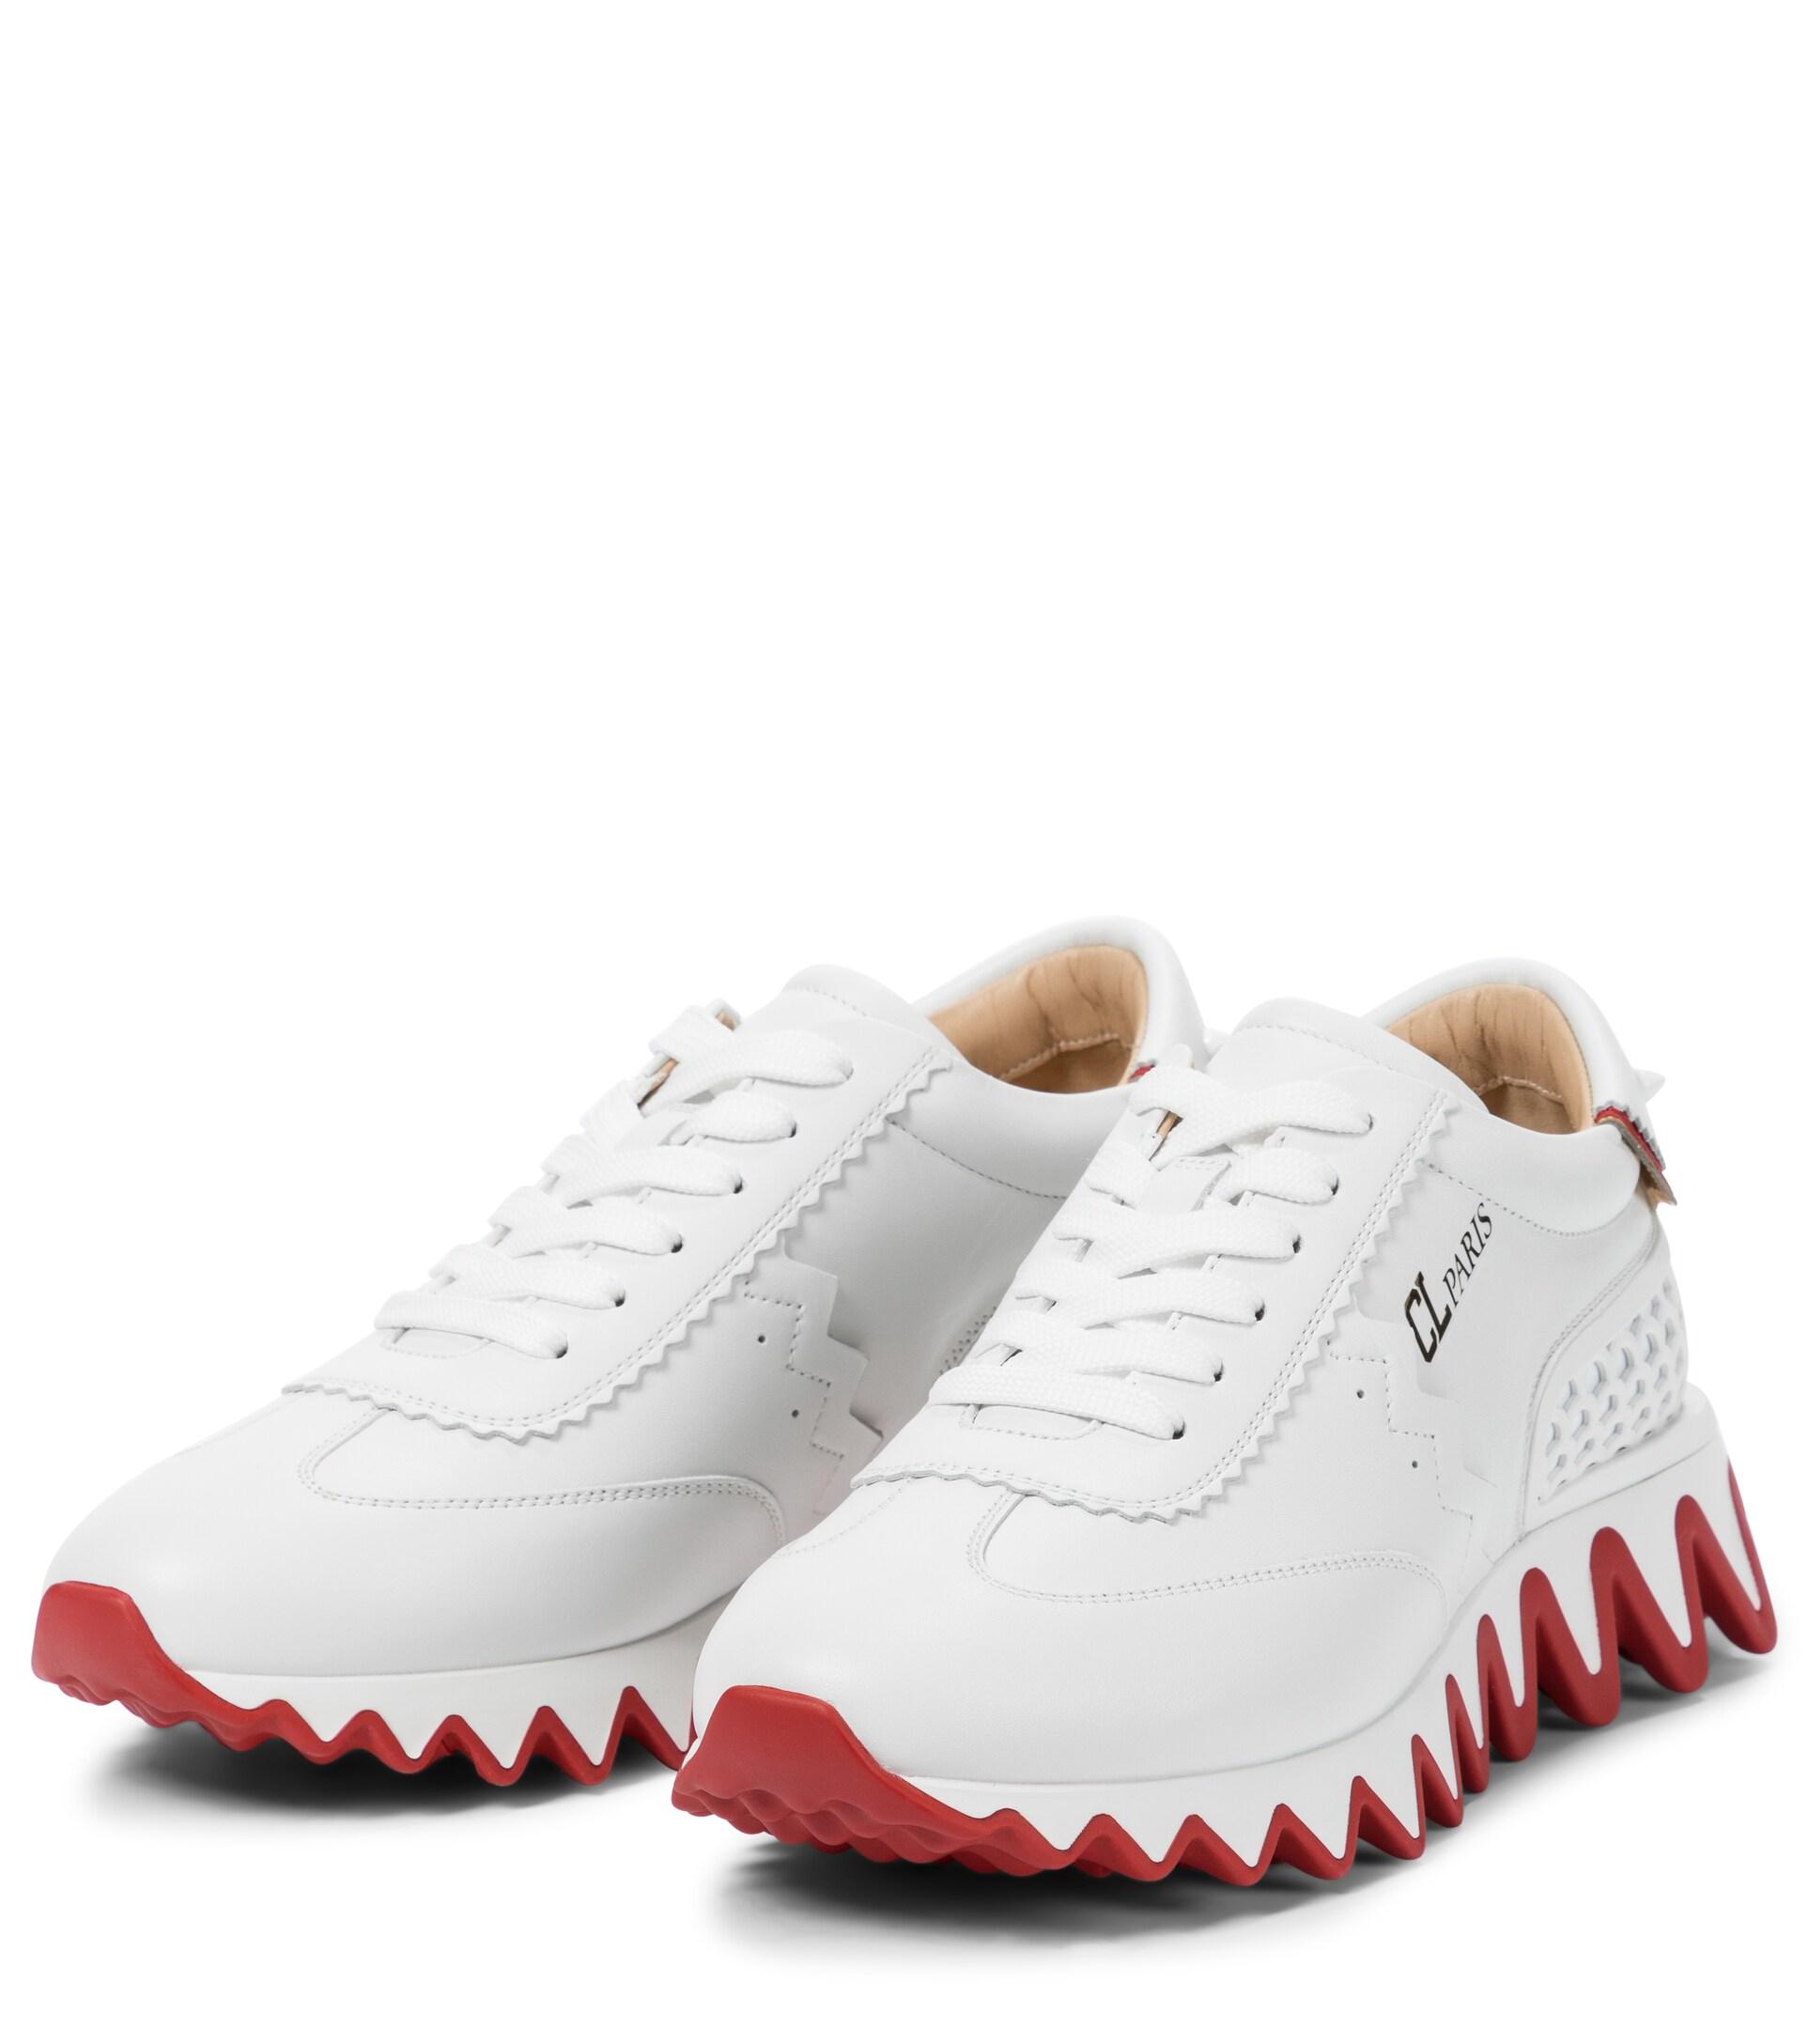 Christian Louboutin Loubishark Leather Sneakers in White | Lyst